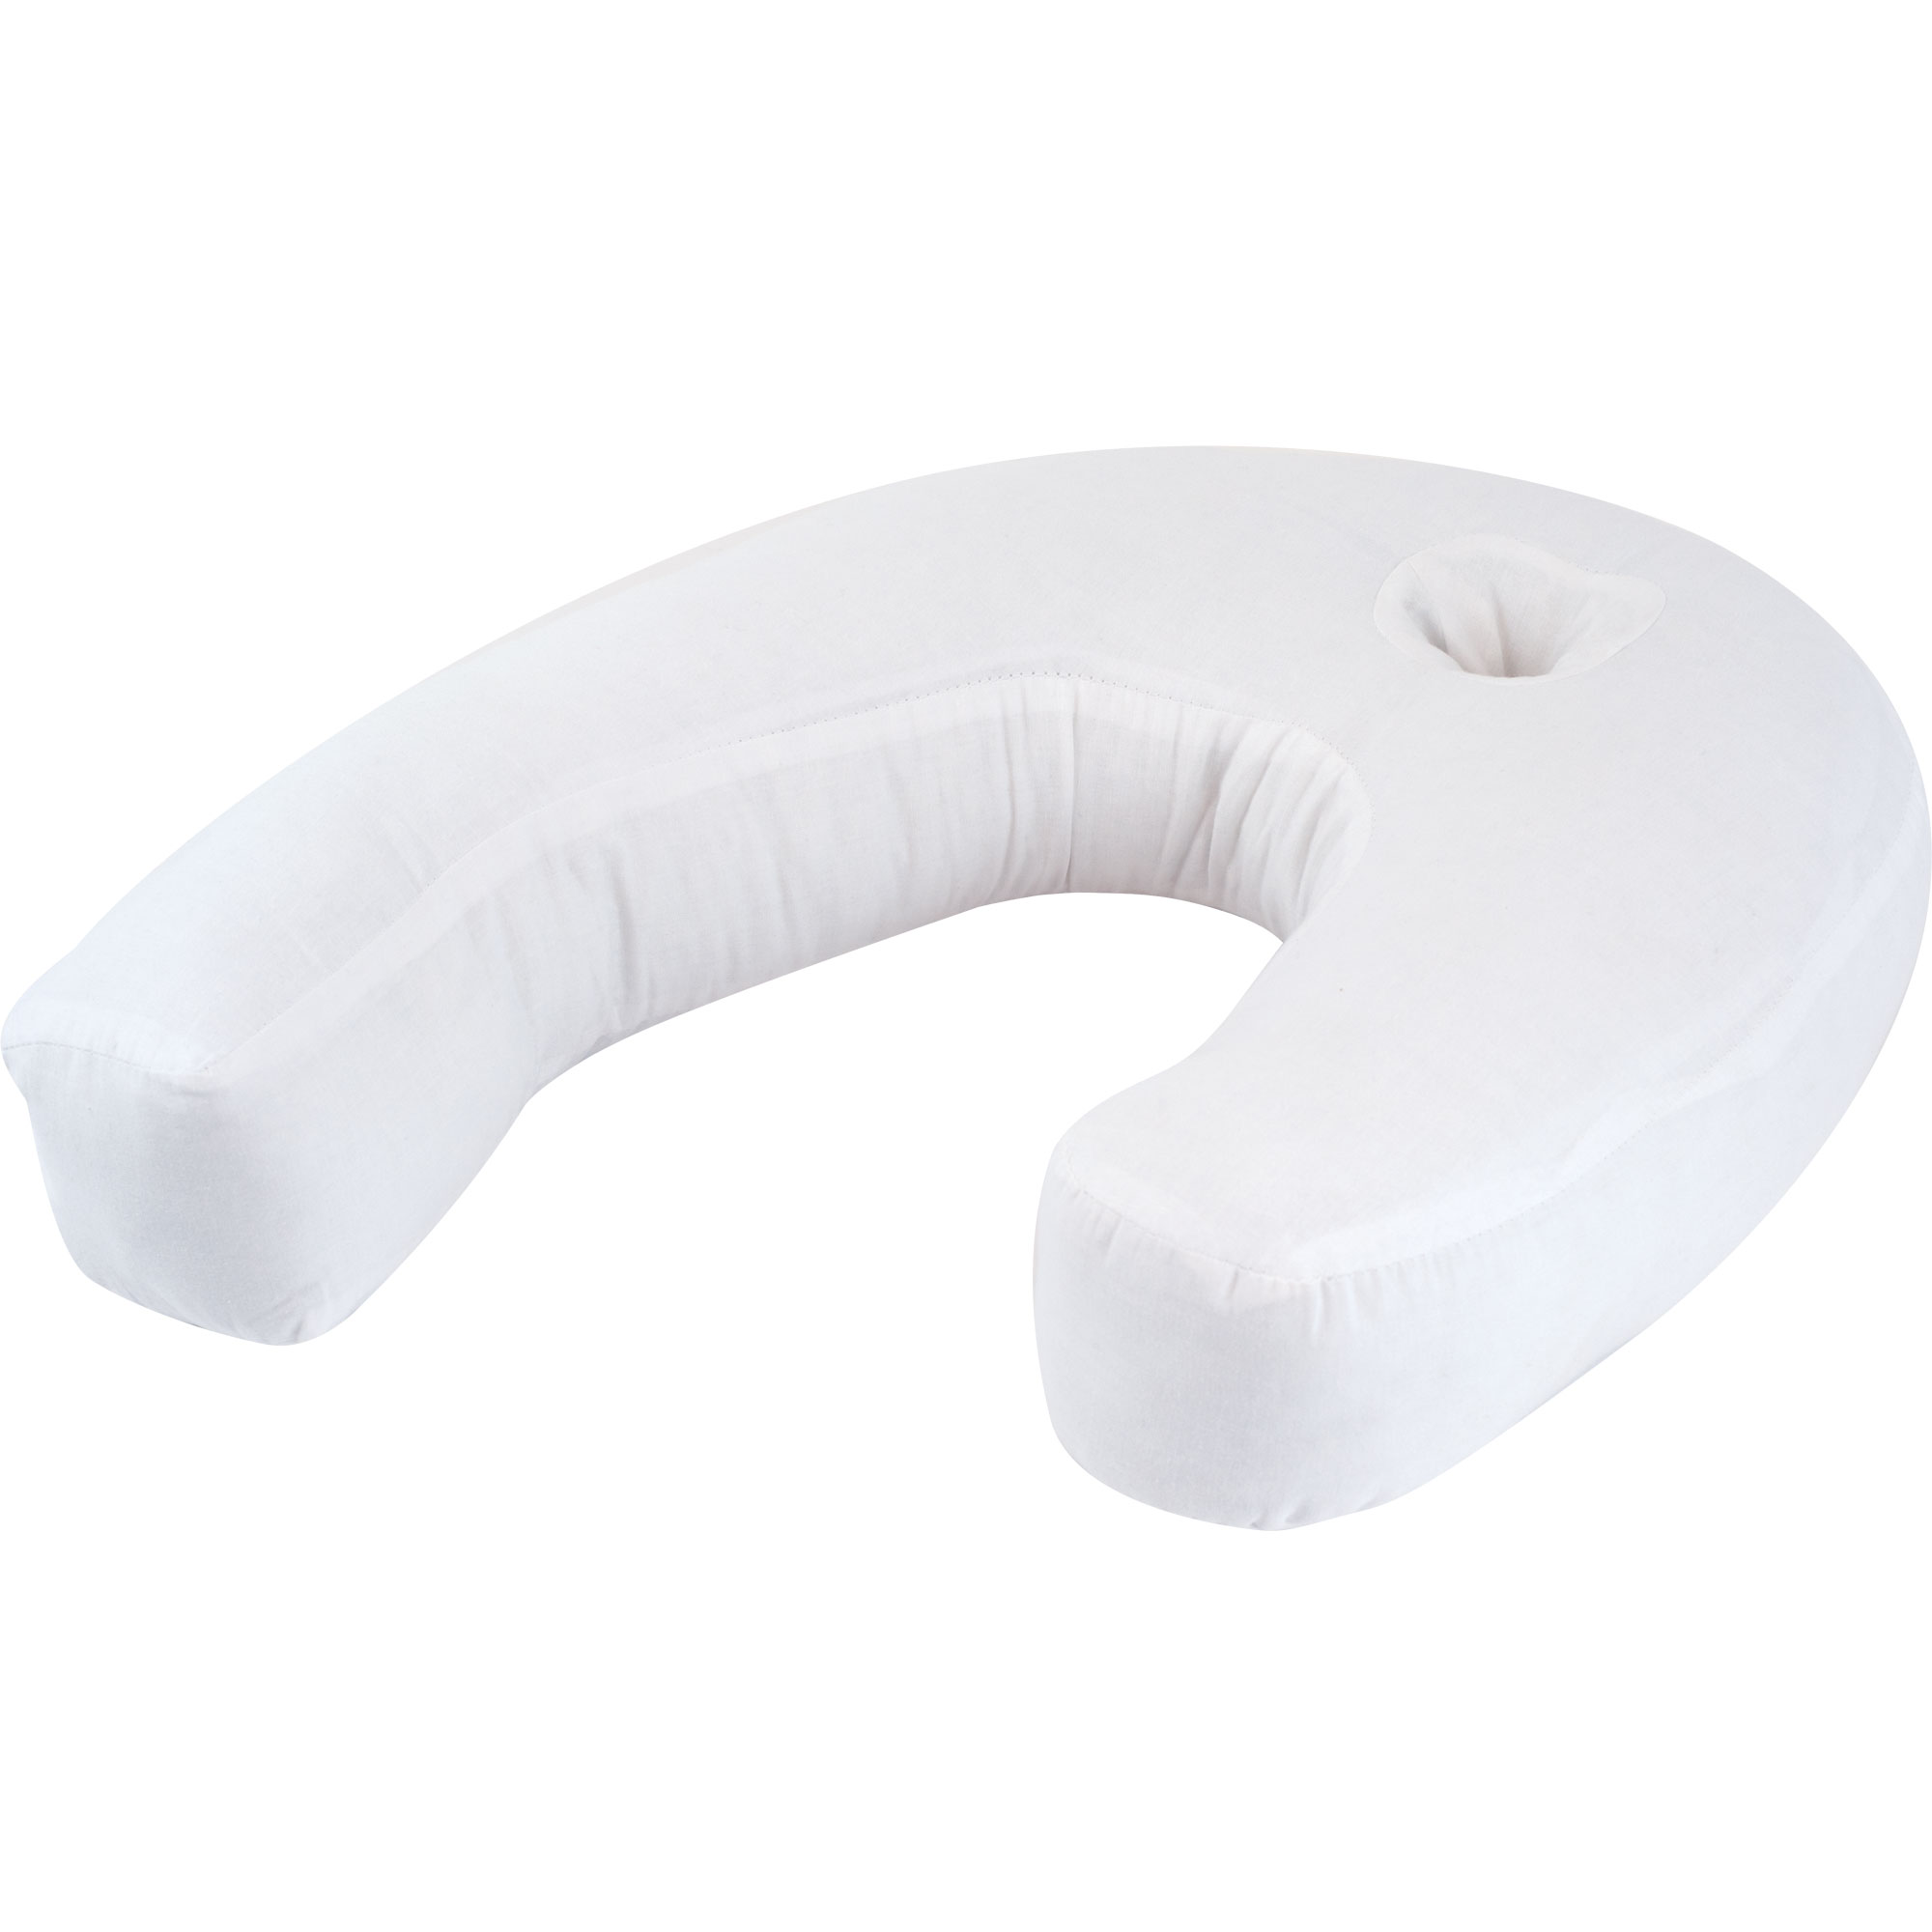 Side Sleeper Hypoallergenic Contour Pillow by Remedy - image 1 of 2